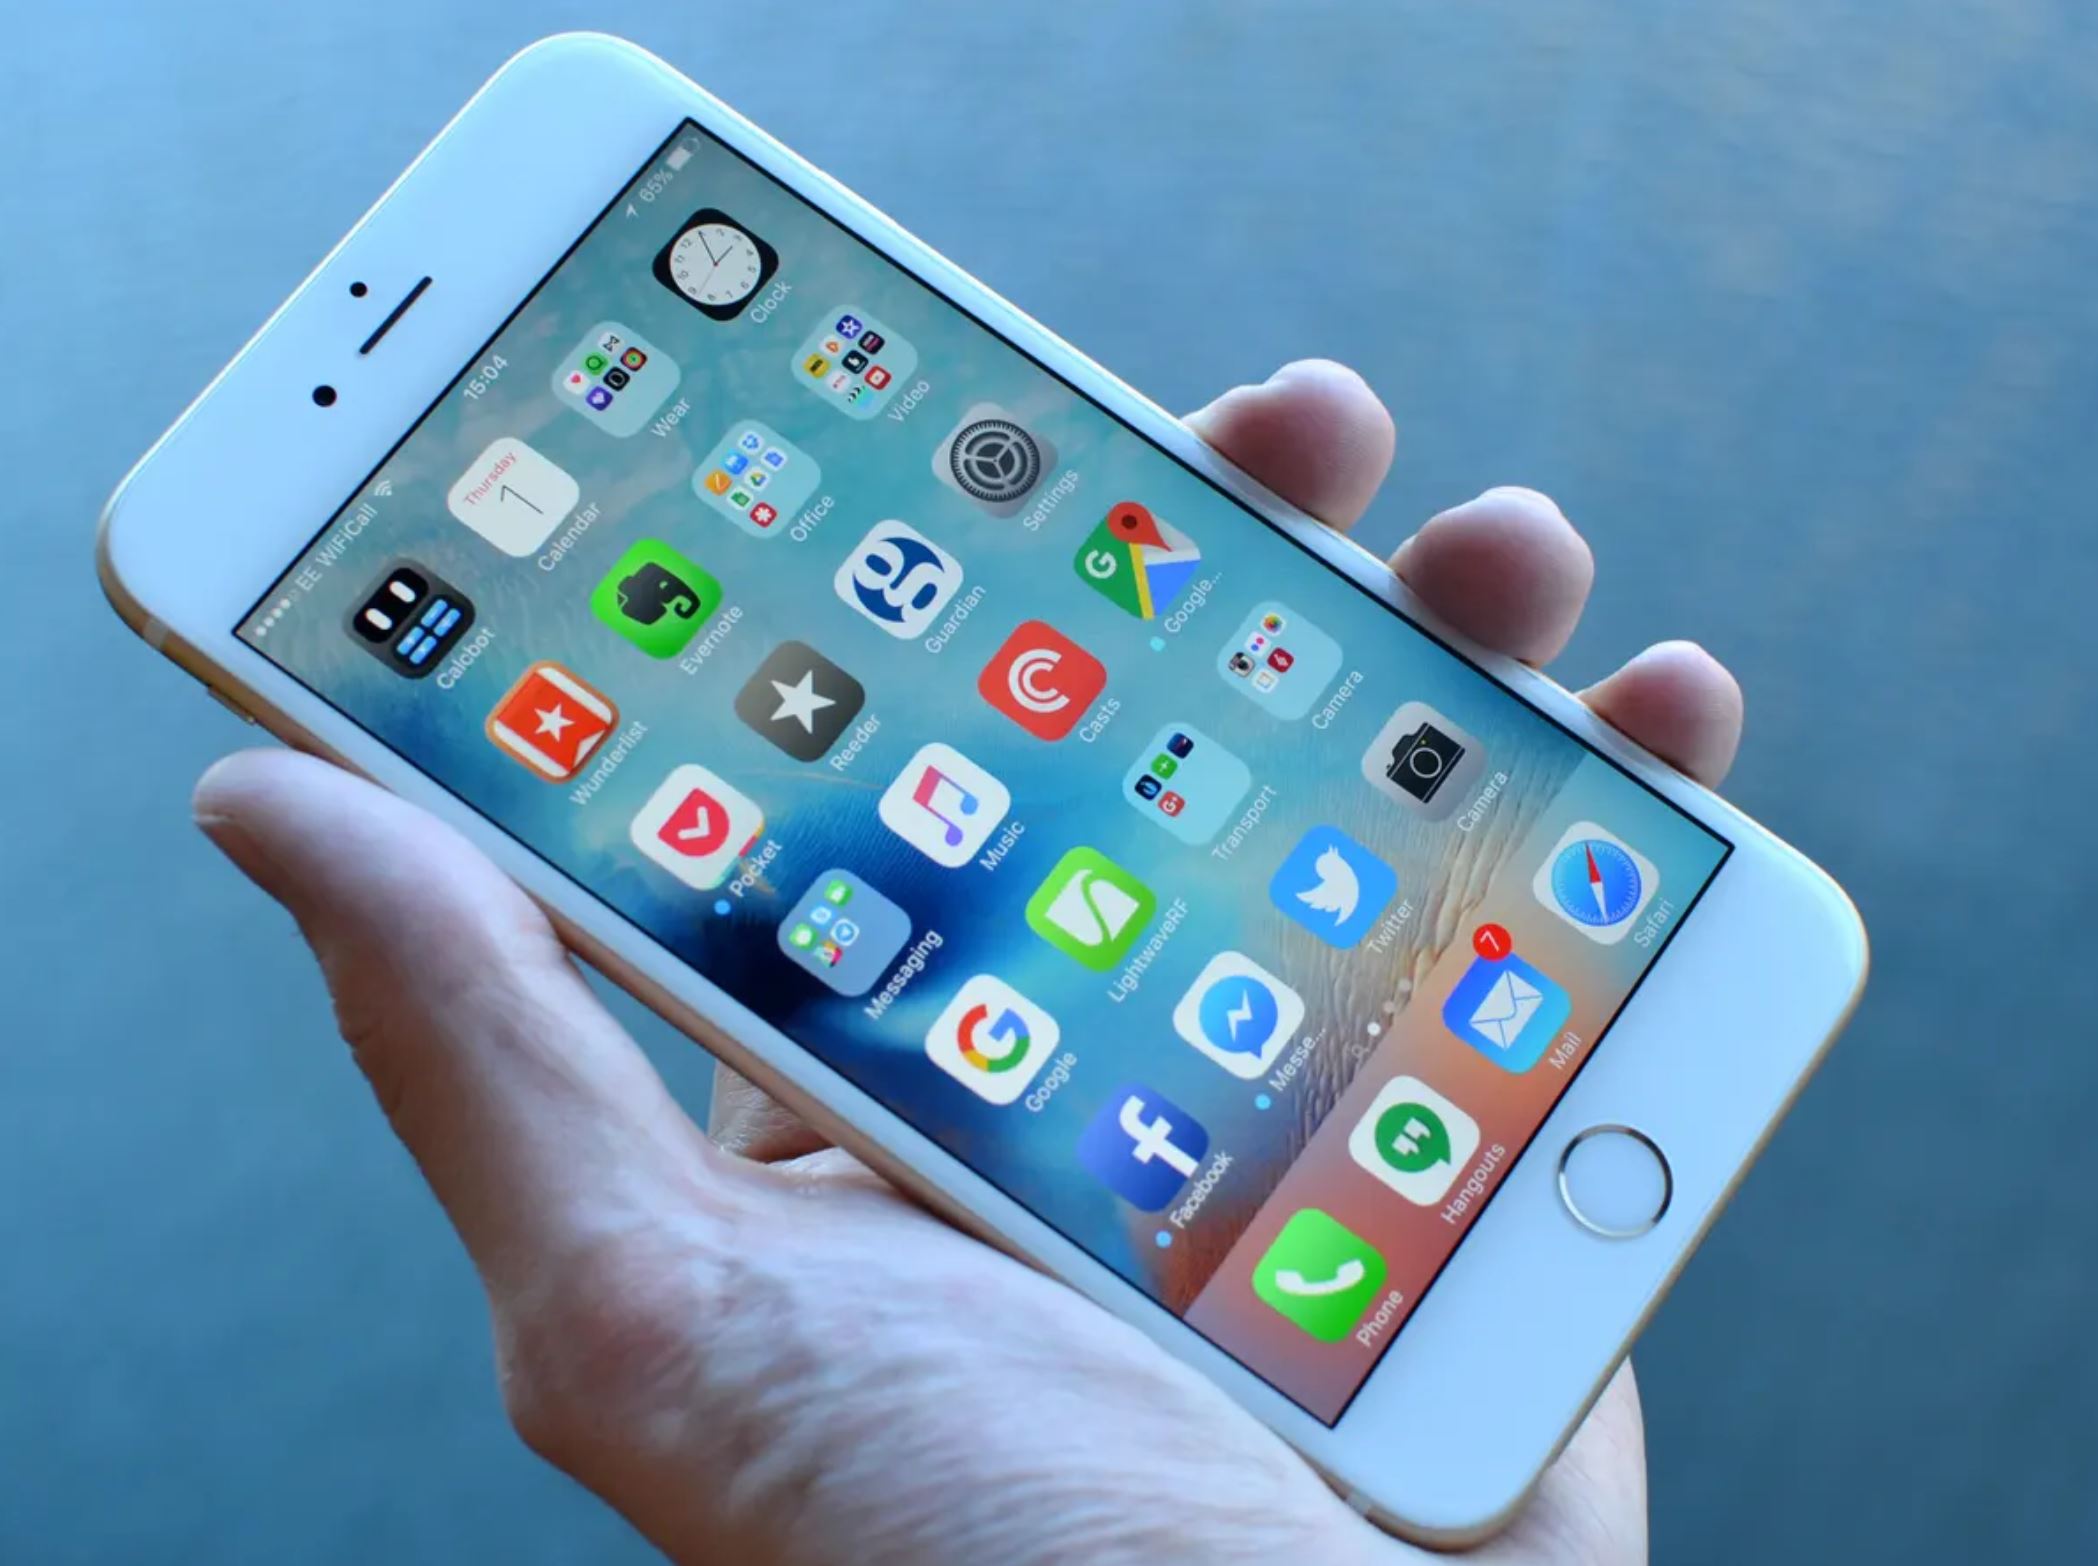 Apple iPhone 6-series is now ‘vintage’ – no more support mill...